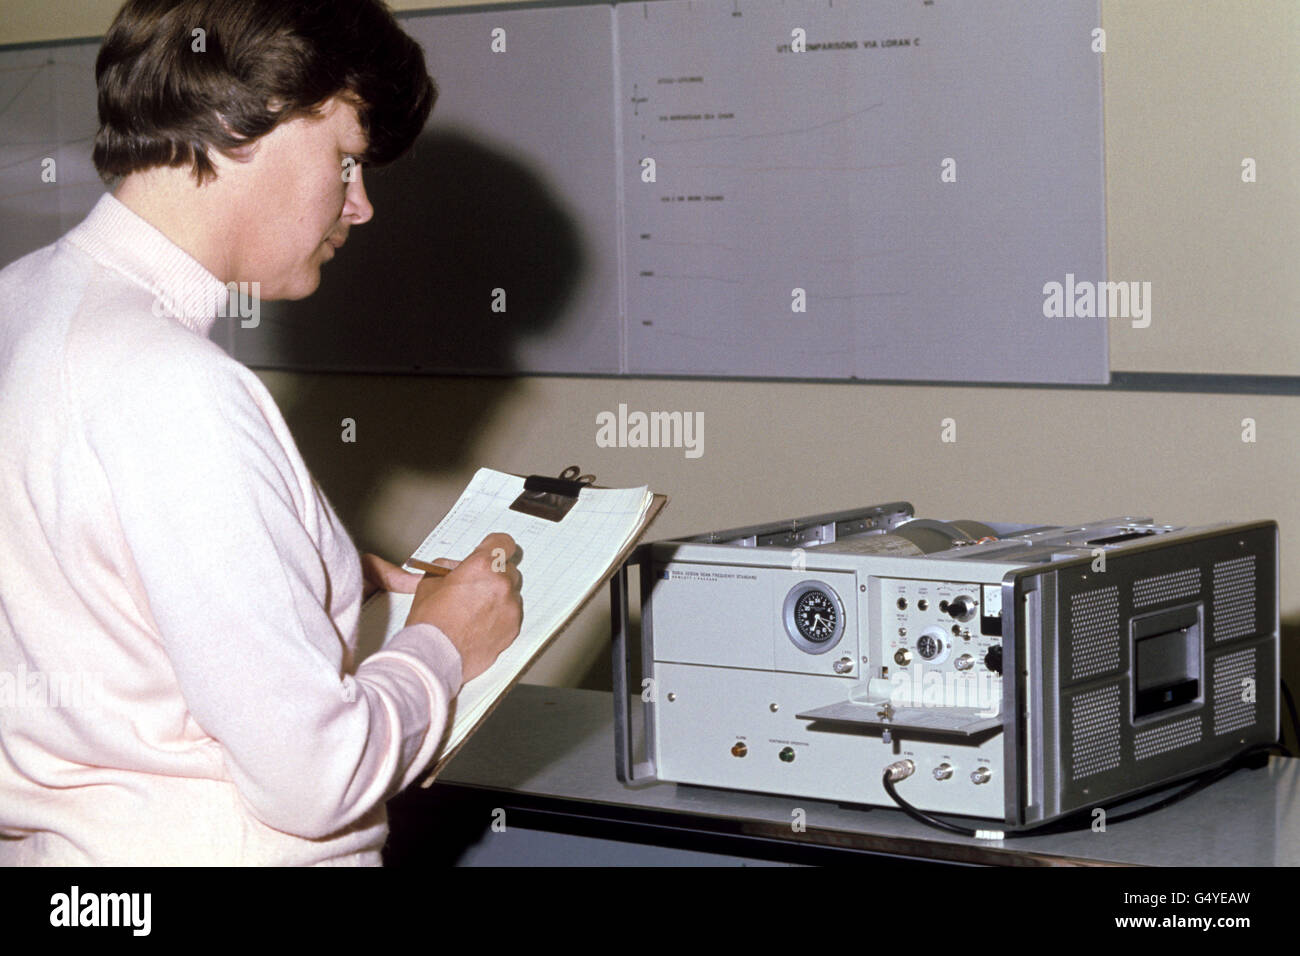 Mrs Anne Strong of Eastbourne checks an atomic clock at the Royal Greenwich Observatory, located near Herstmonceux Castle, East Sussex Stock Photo